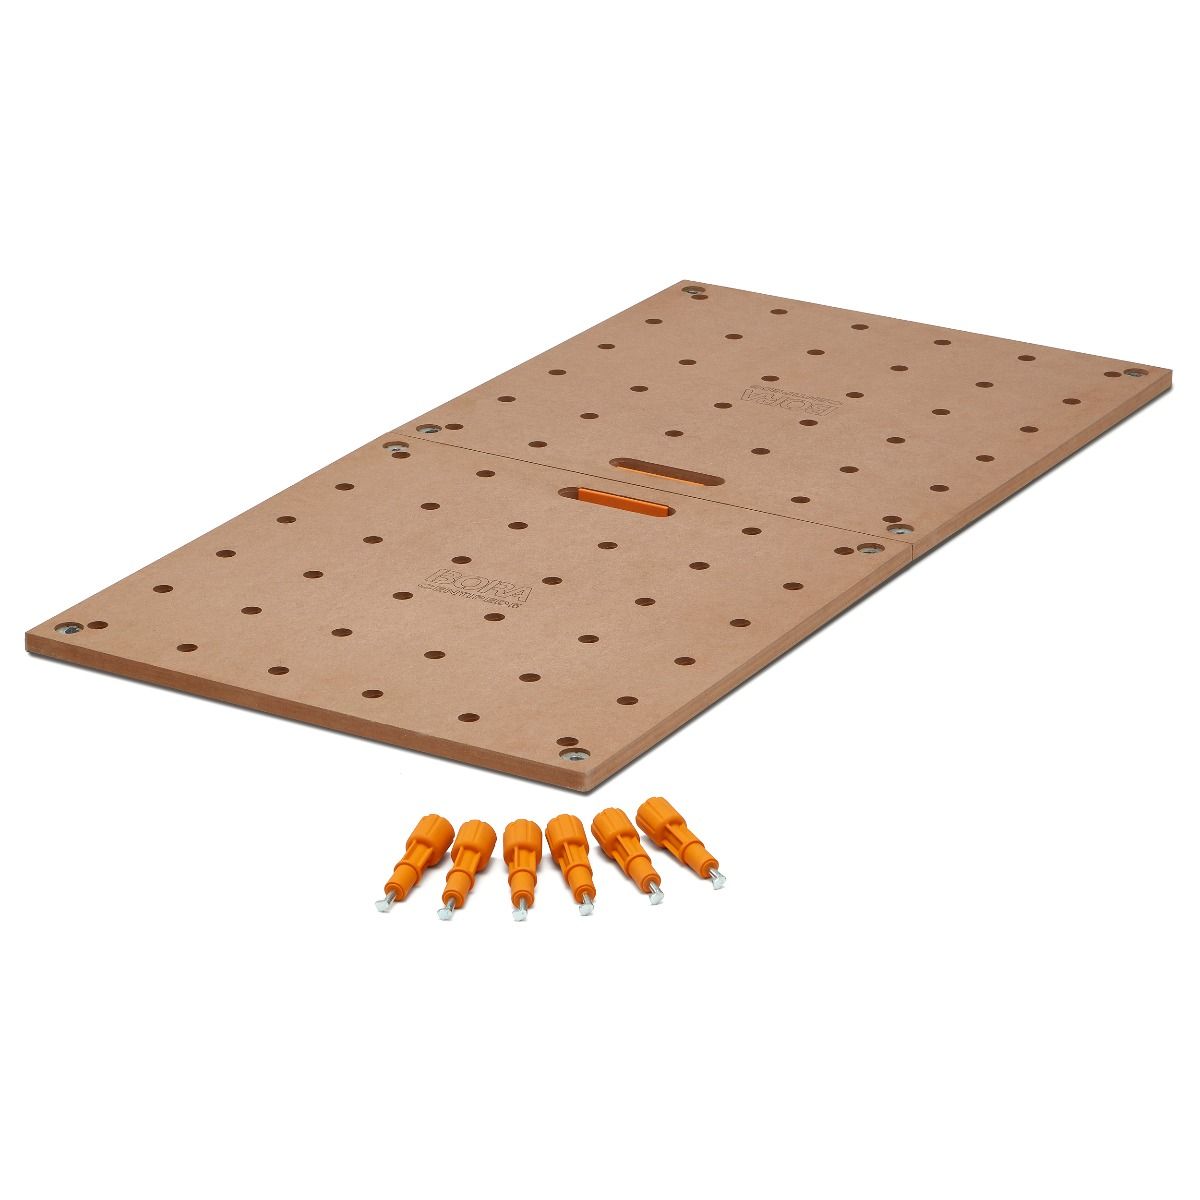 BORA Centipede Workbench Top - with 3/4 inch dog holes (CK22T)